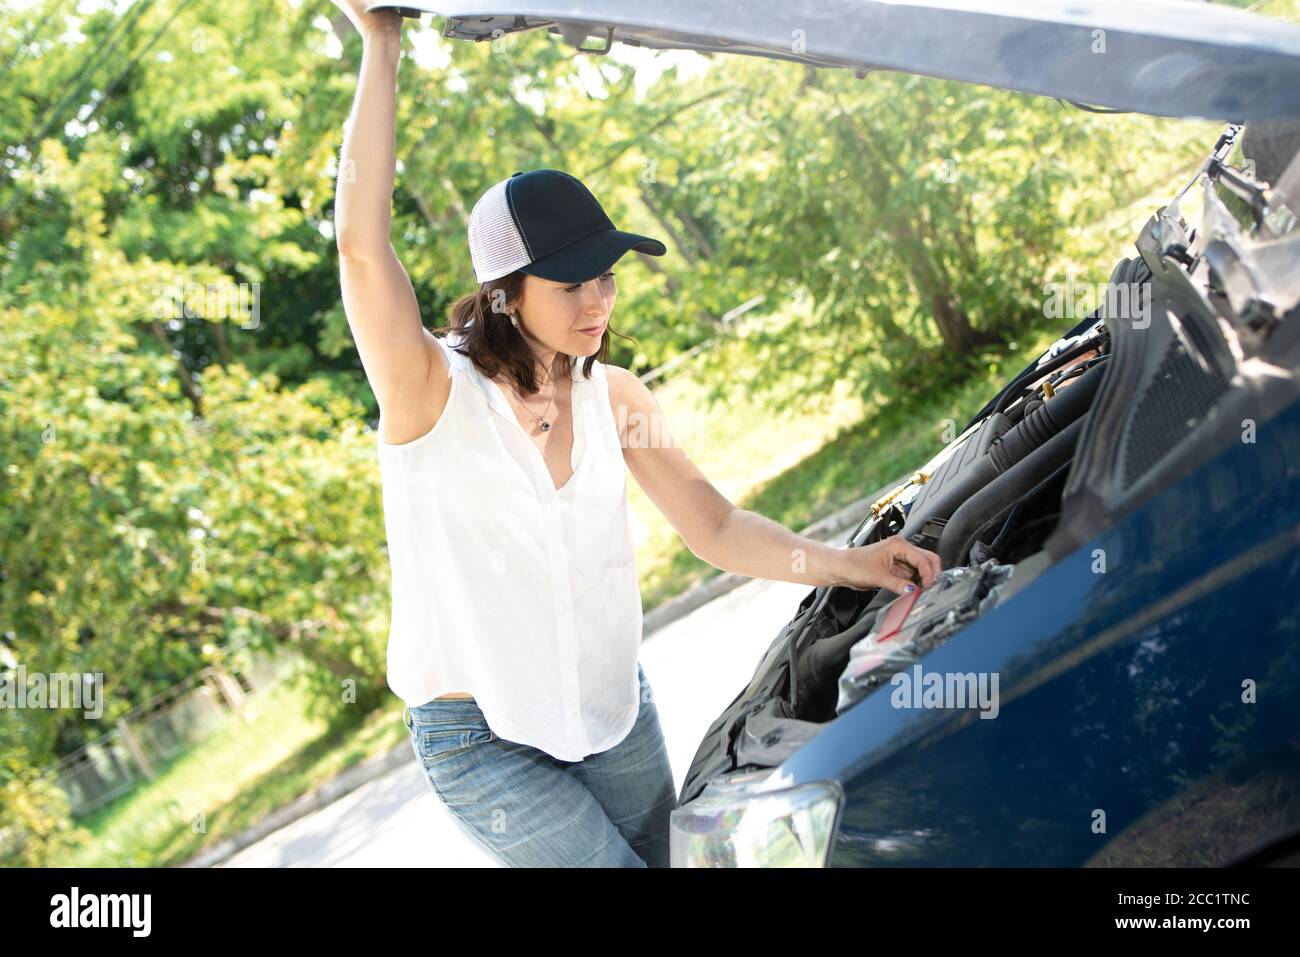 A woman waits for assistance near her car broken down on the road side. Stock Photo